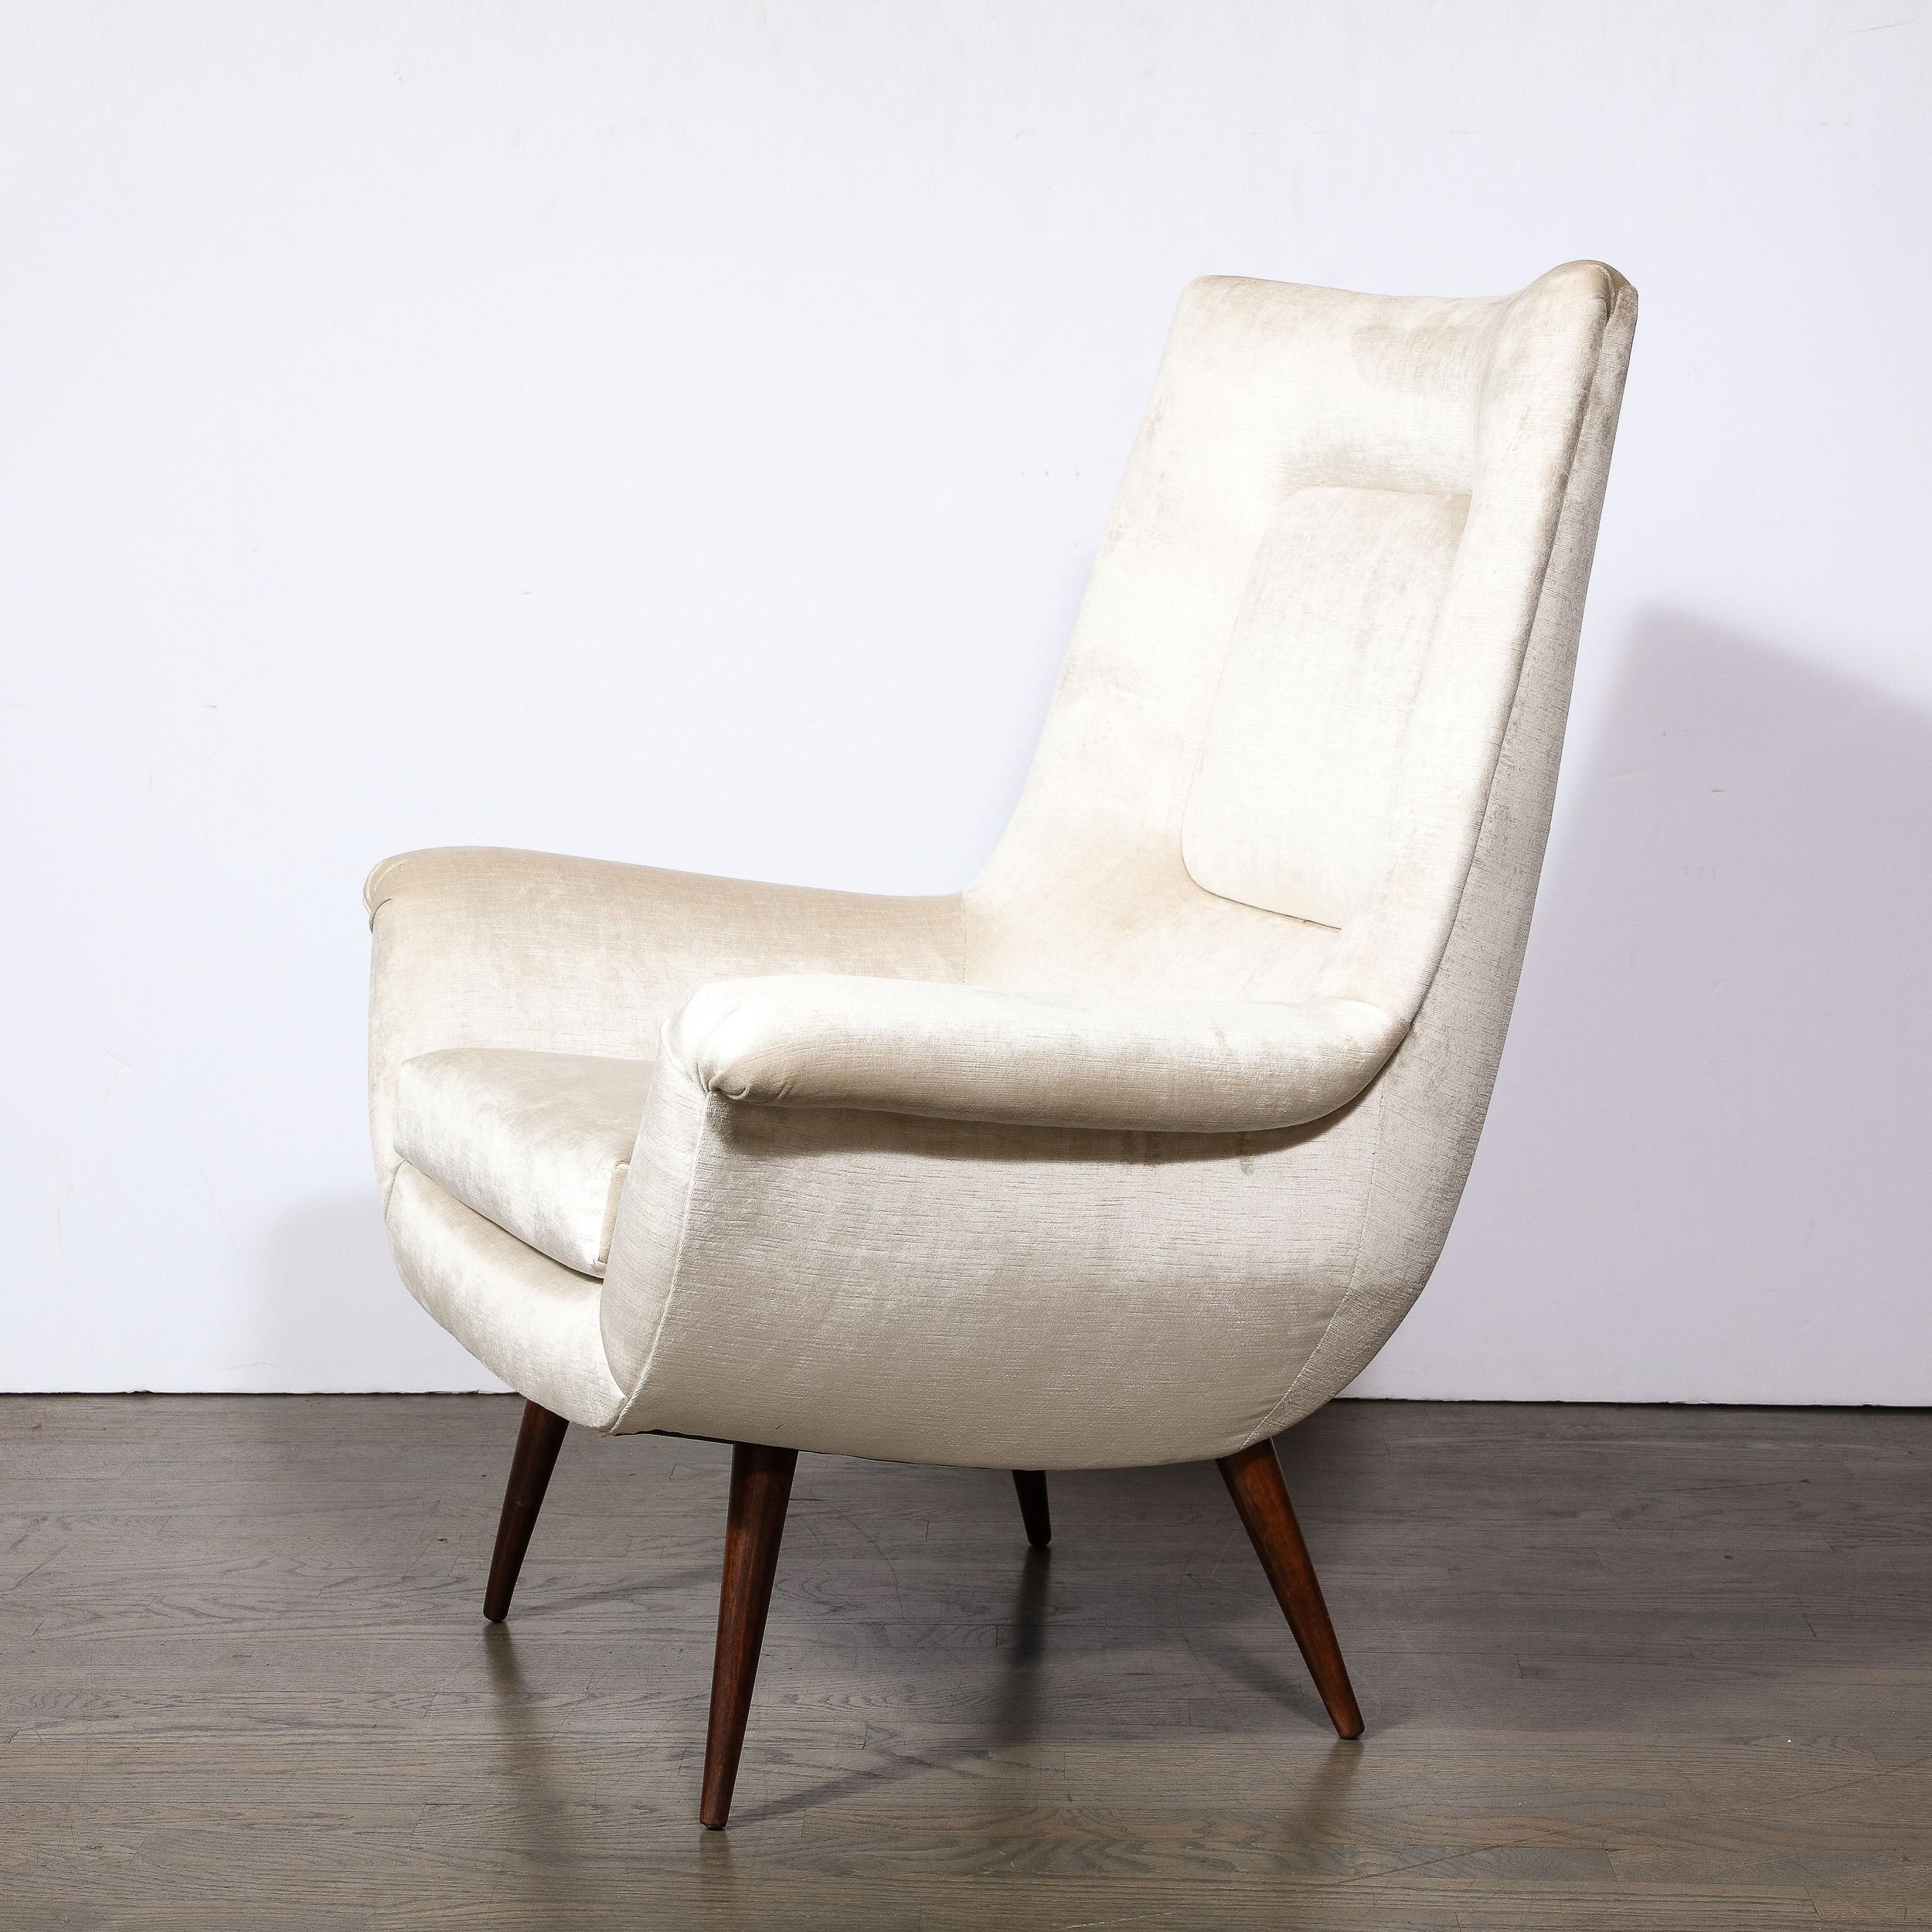 American Mid-Century Tufted Back Lounge Chair in Platinum Velvet by Lawrence Peabody